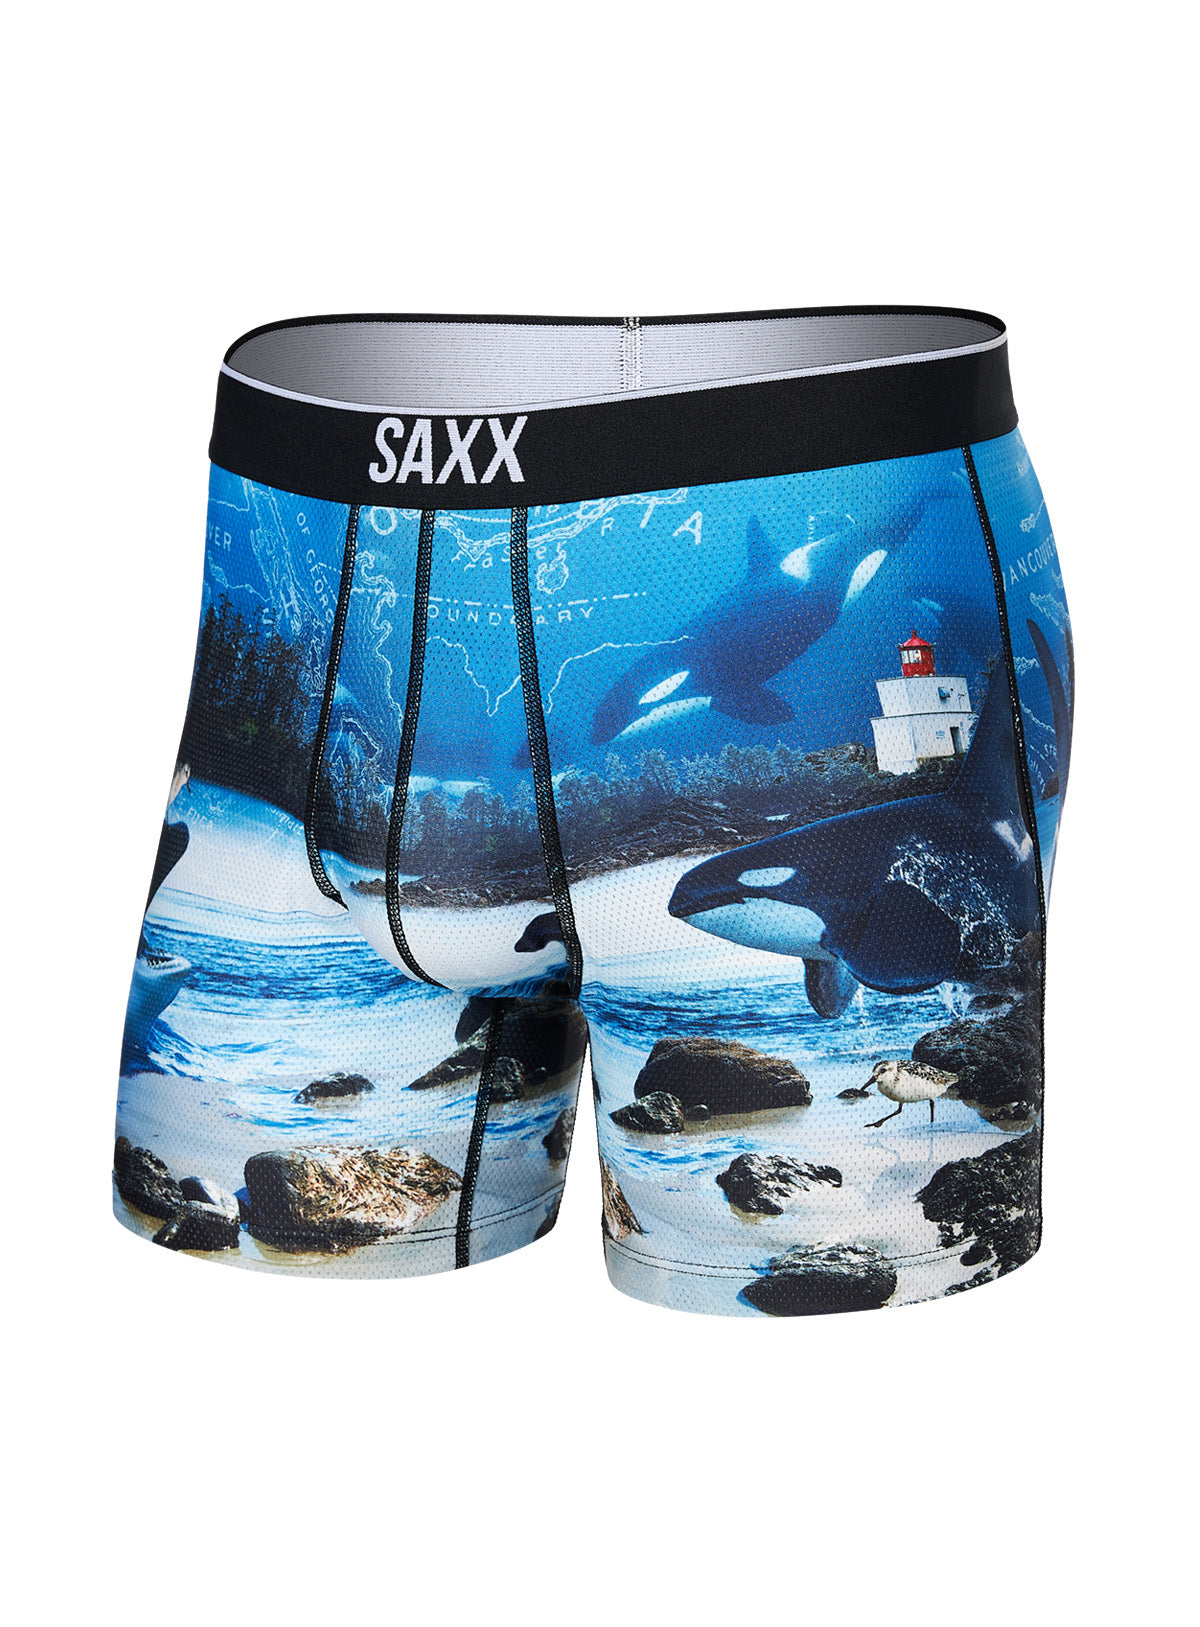 SAXX UNDERWEAR LARGE TO XXL IN - Gilbert's Big and Tall